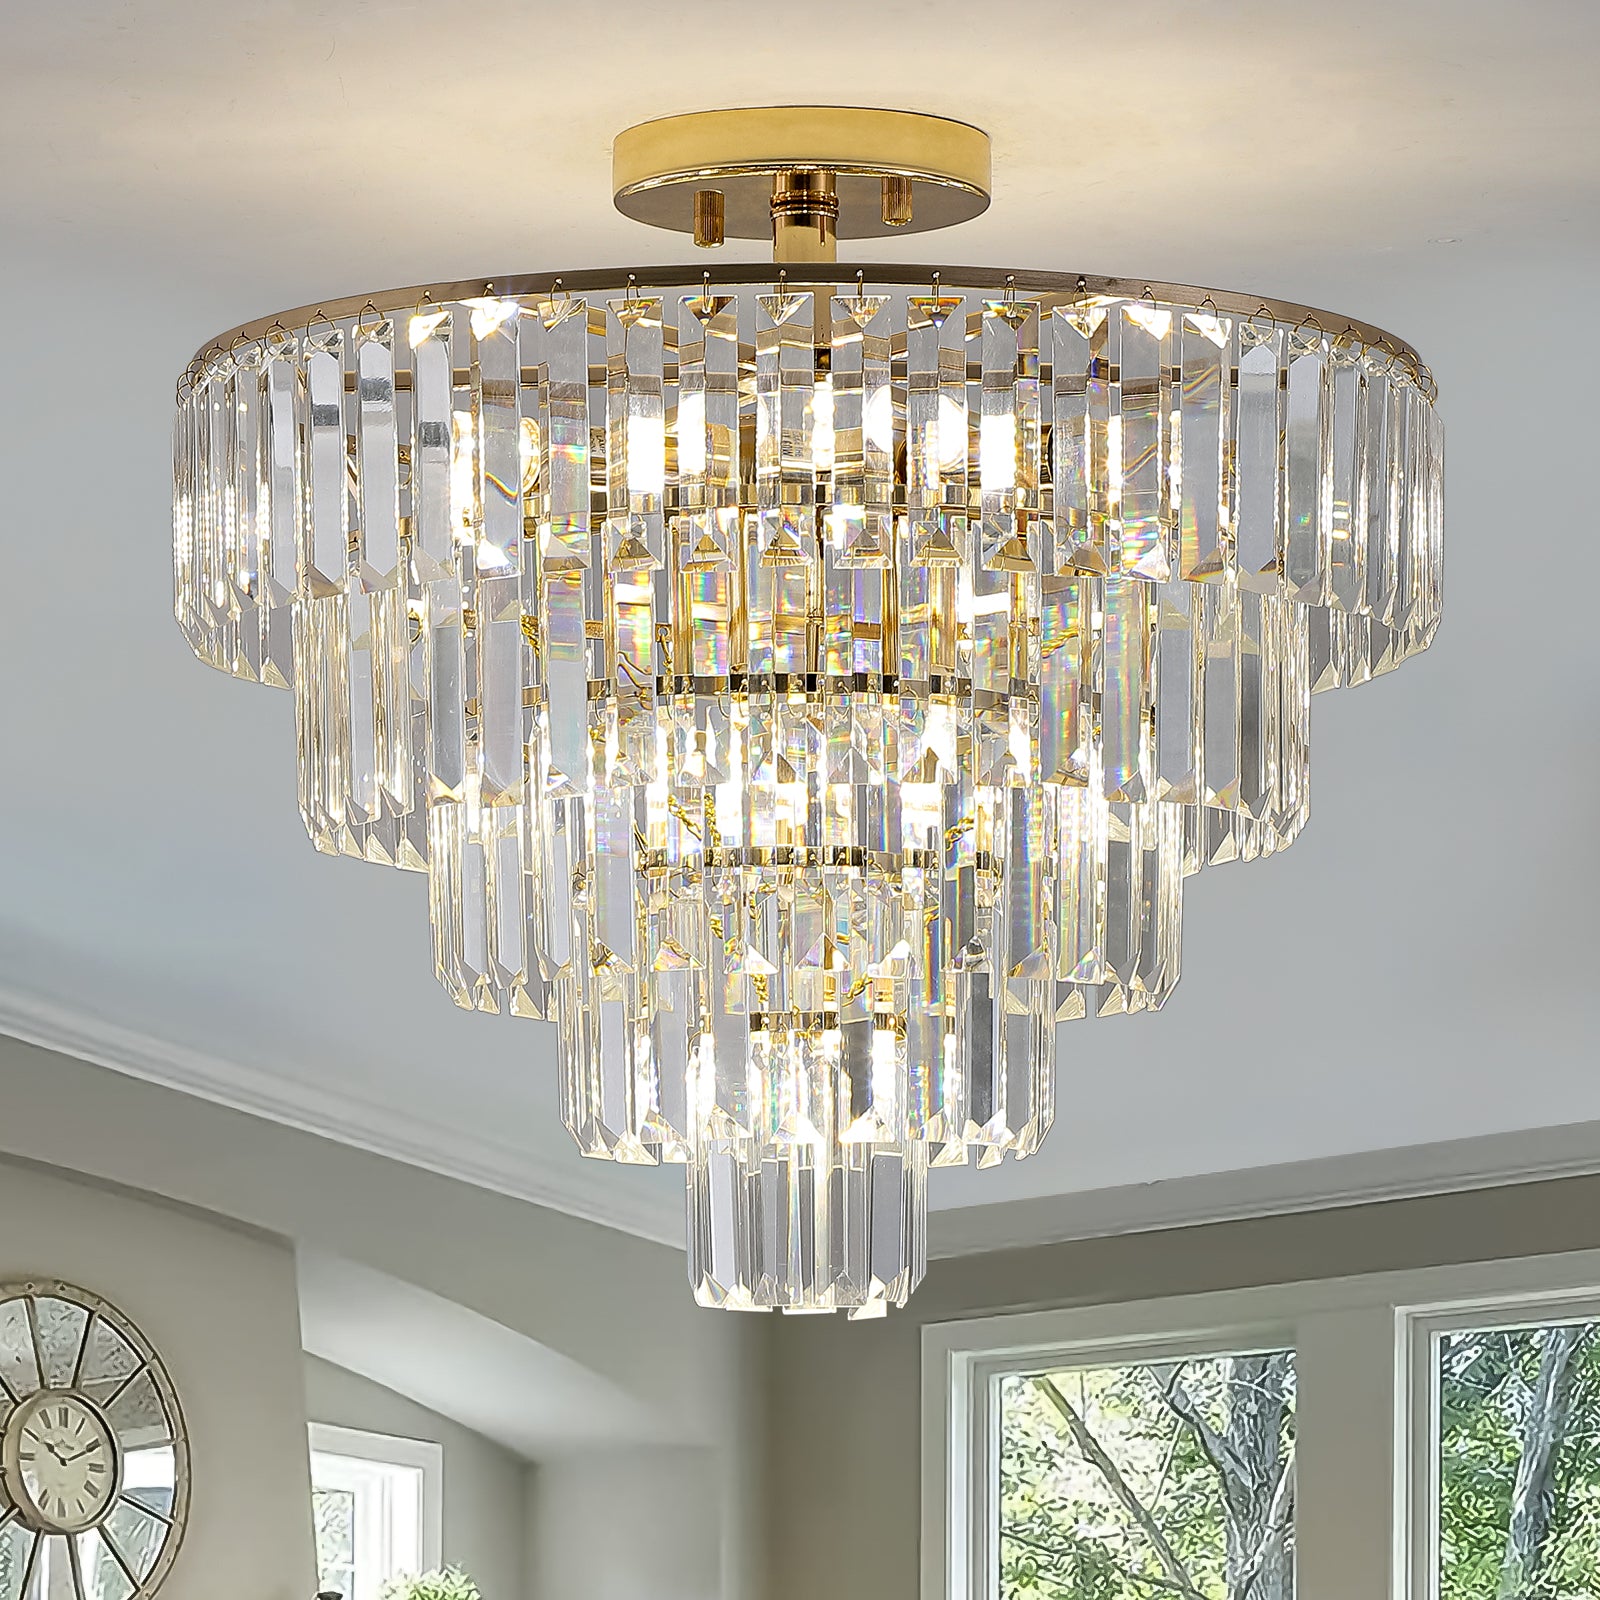 Gold Crystal Chandeliers,5-Tier Round Semi Flush Mount Chandelier Light Fixture,Large Contemporary Luxury Ceiling Lighting for Living Room Dining Room Bedroom Hallway - Enova Luxe Home Store